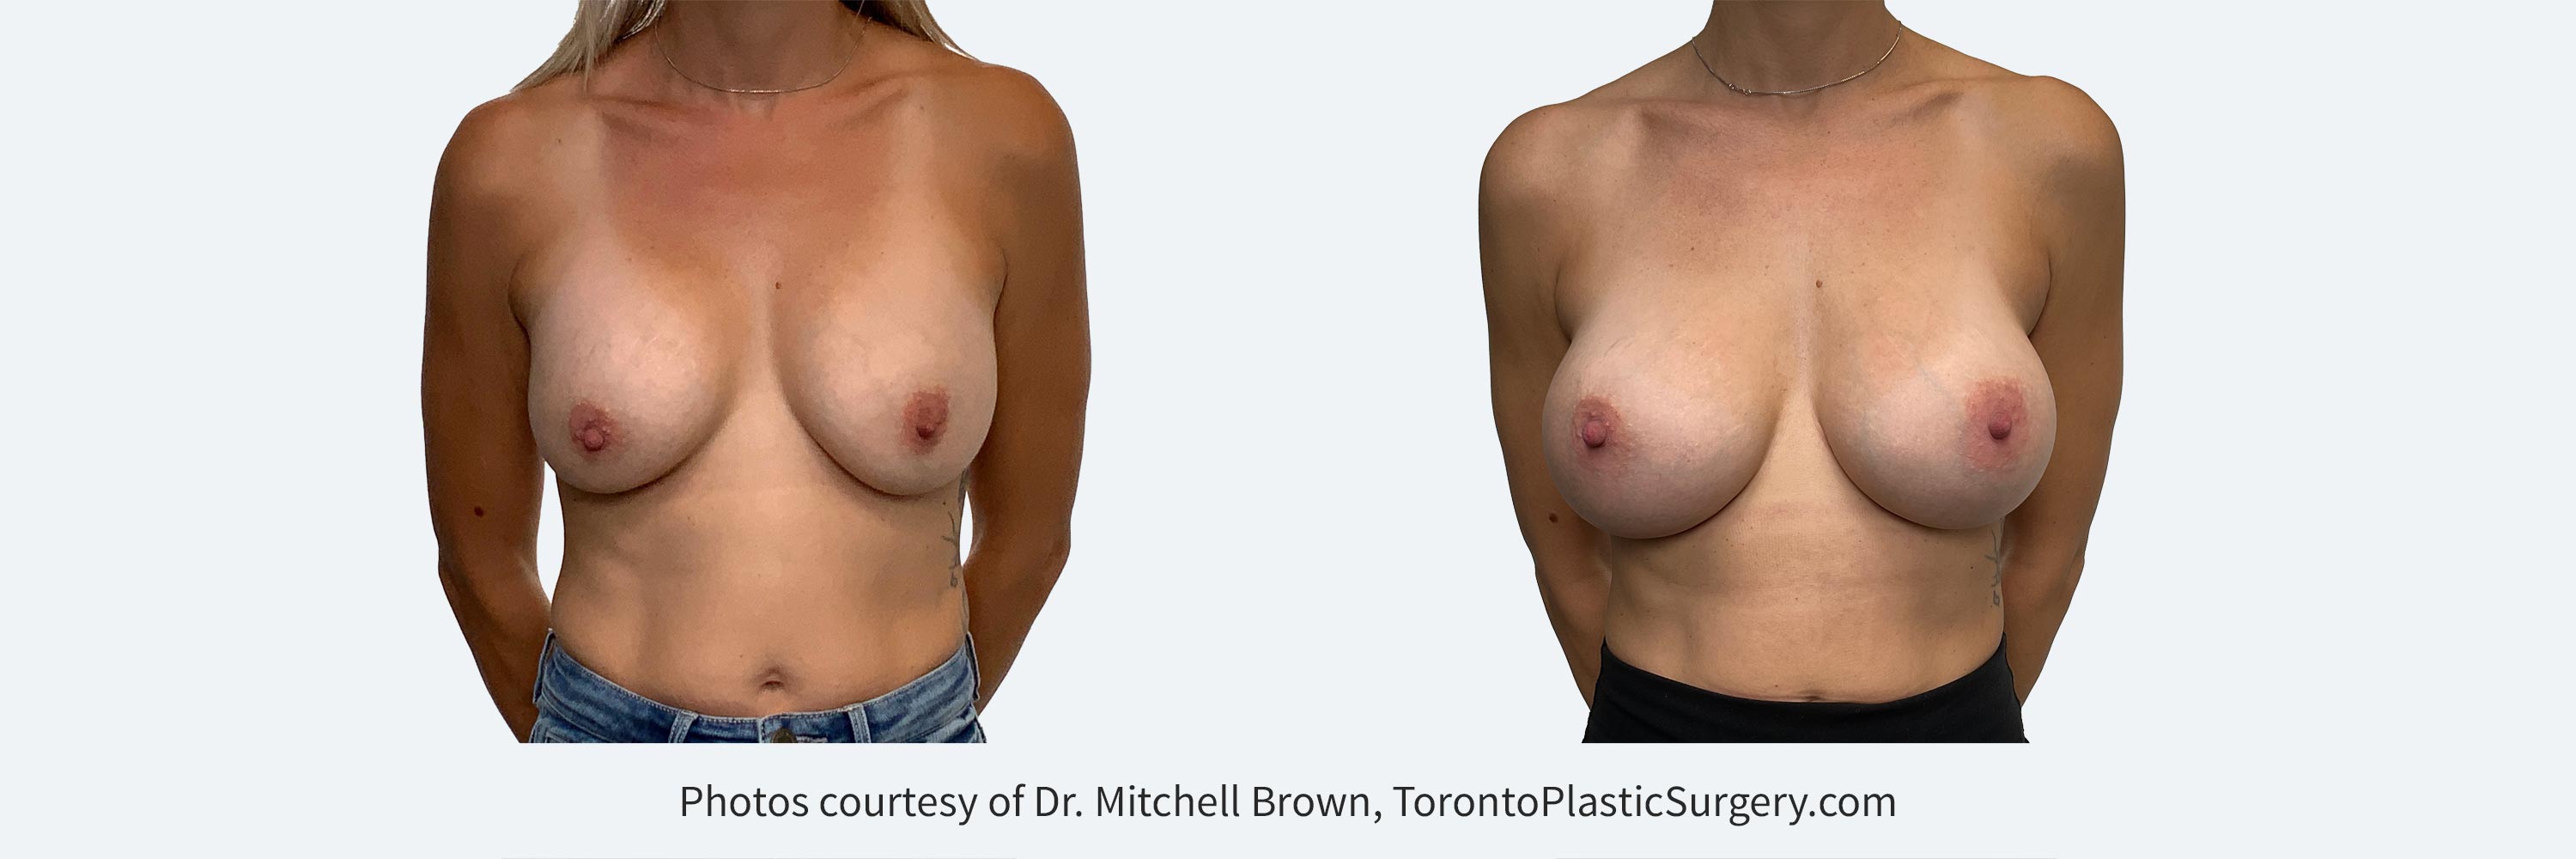 37 year female with high riding breast implants. Corrected with removal and replacement of larger 475cc implants.